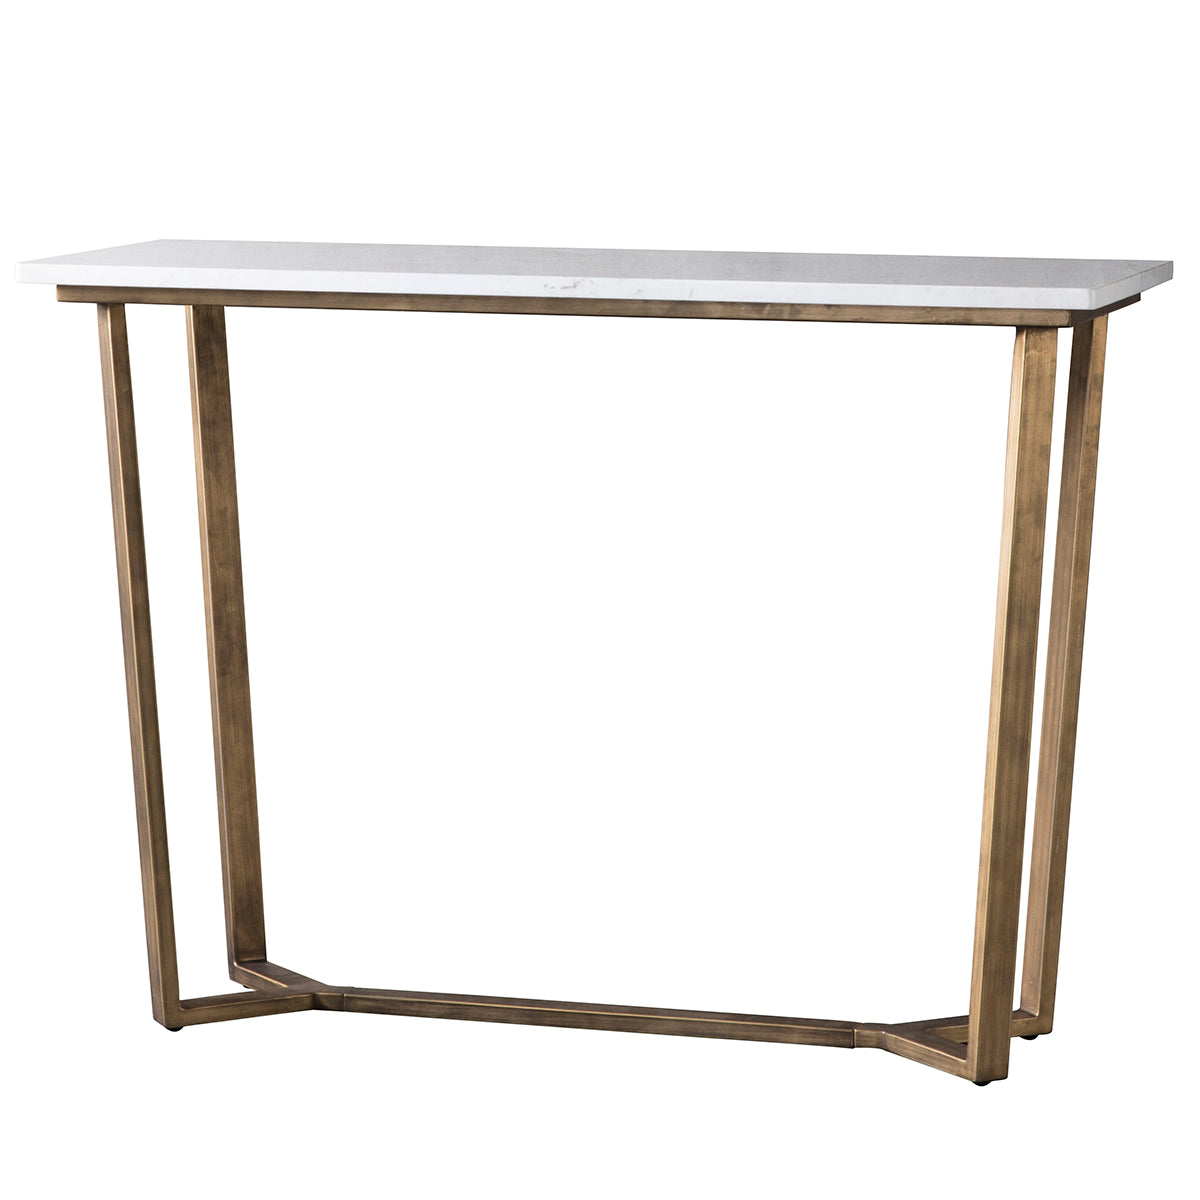 A Hallsand console table with a gold base and marble top for interior decor from Kikiathome.co.uk.